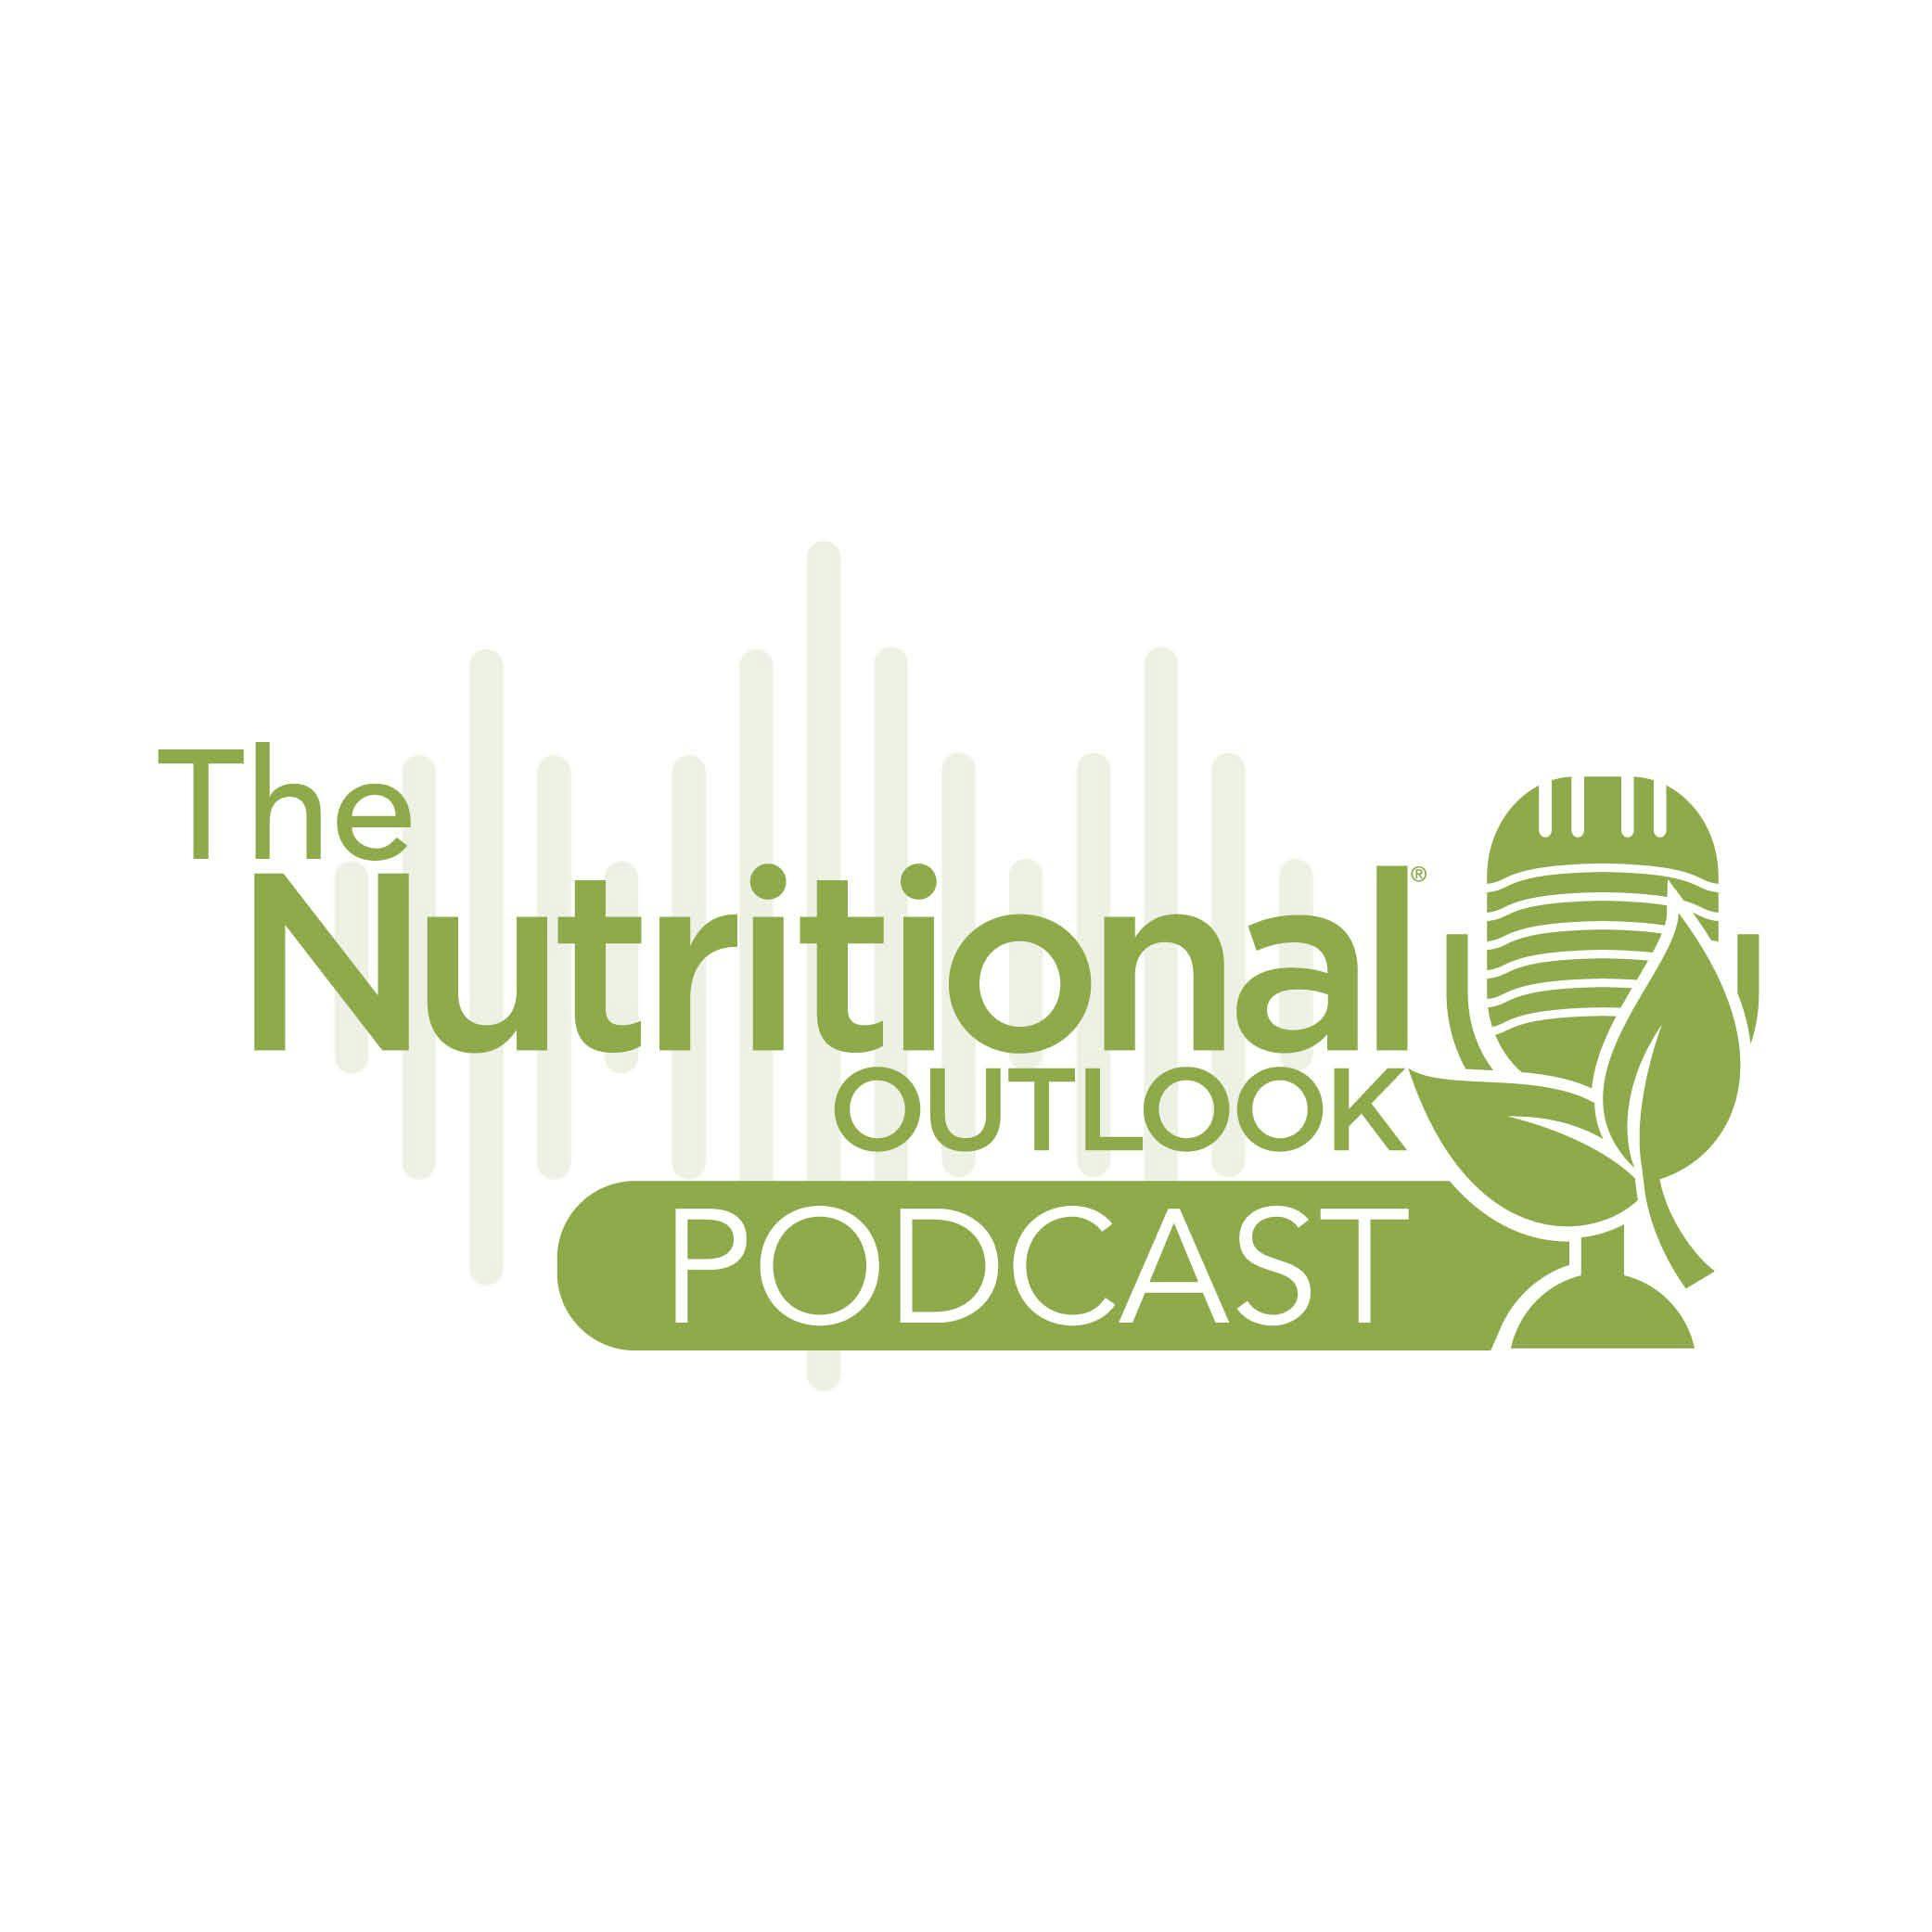 The Nutritional Outlook Podcast Episode 27: How is AI used to discover and develop novel ingredients?